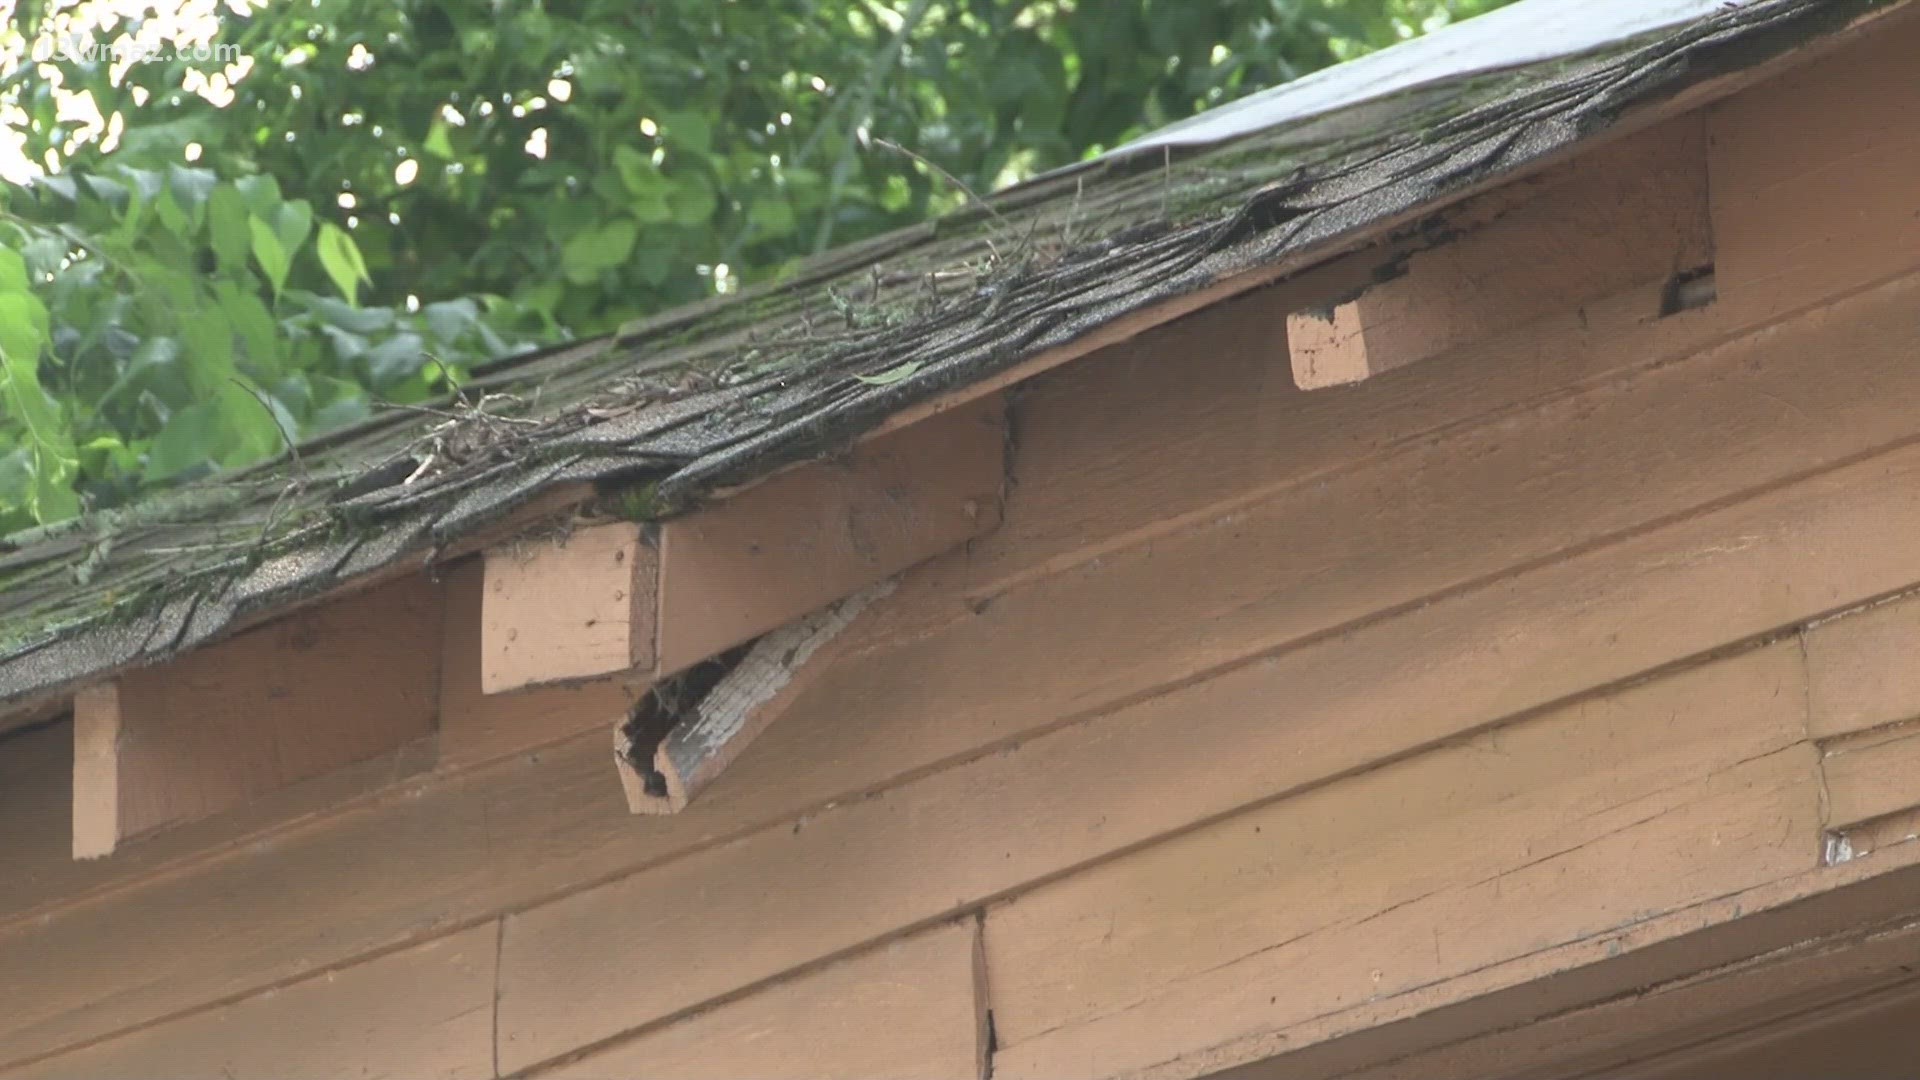 Code Officer Craig Lewis says there was exterior damage, rotting cabinets and holes in the roof at 346 Grant Avenue. A judge sent him to jail for a week.